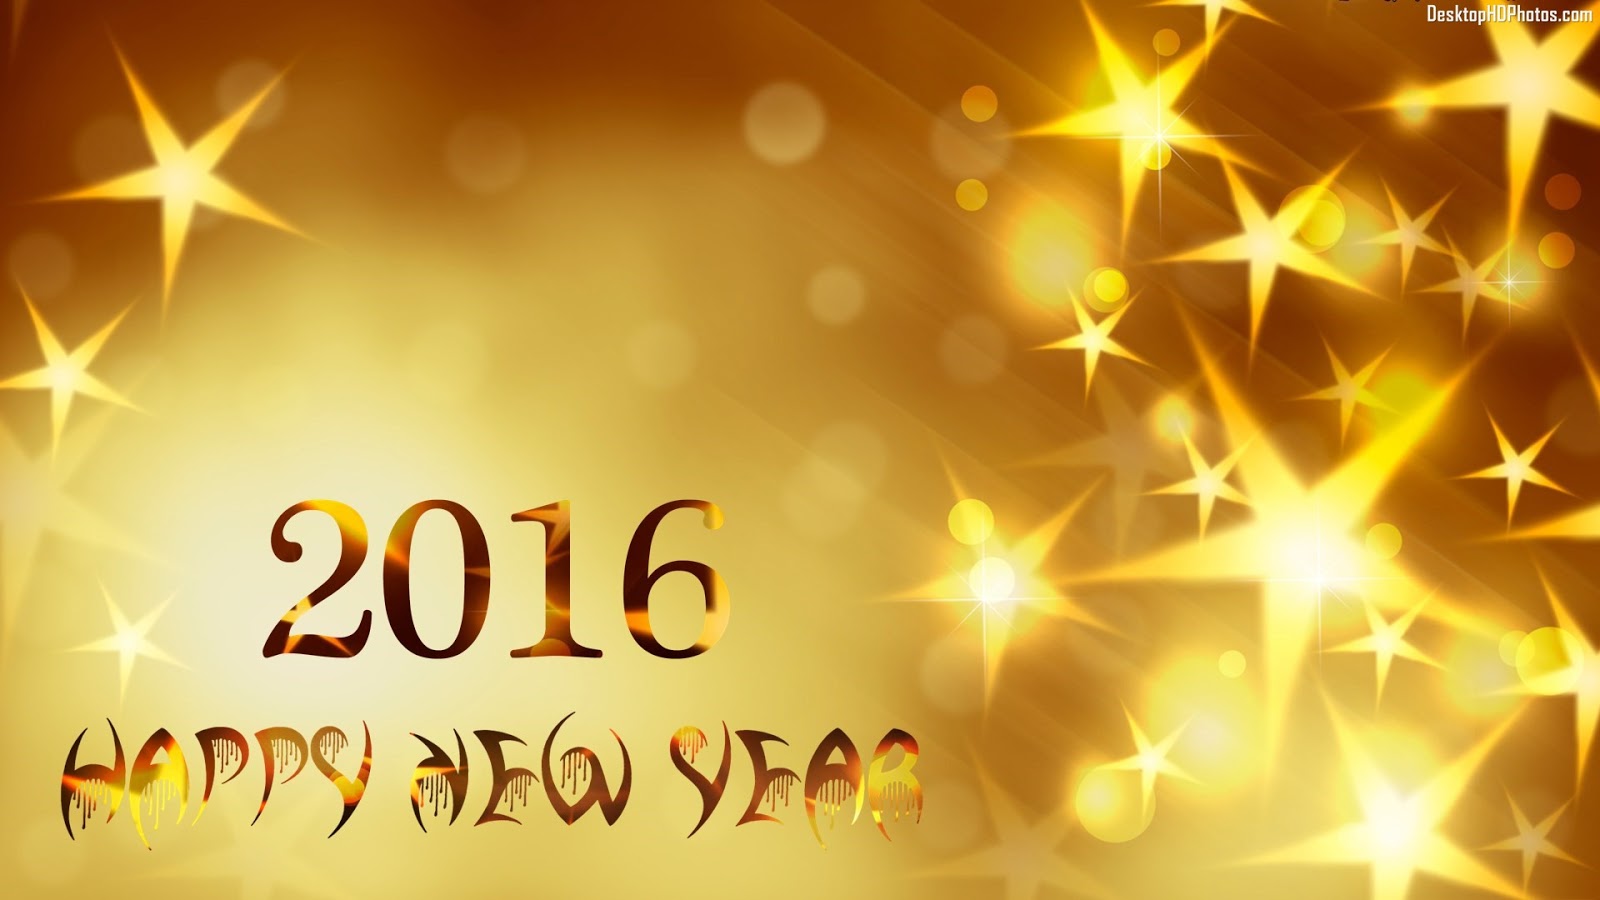 Wallpapers New Years Eve Wallpaper - Background Happy New Year 2016 - HD Wallpaper 